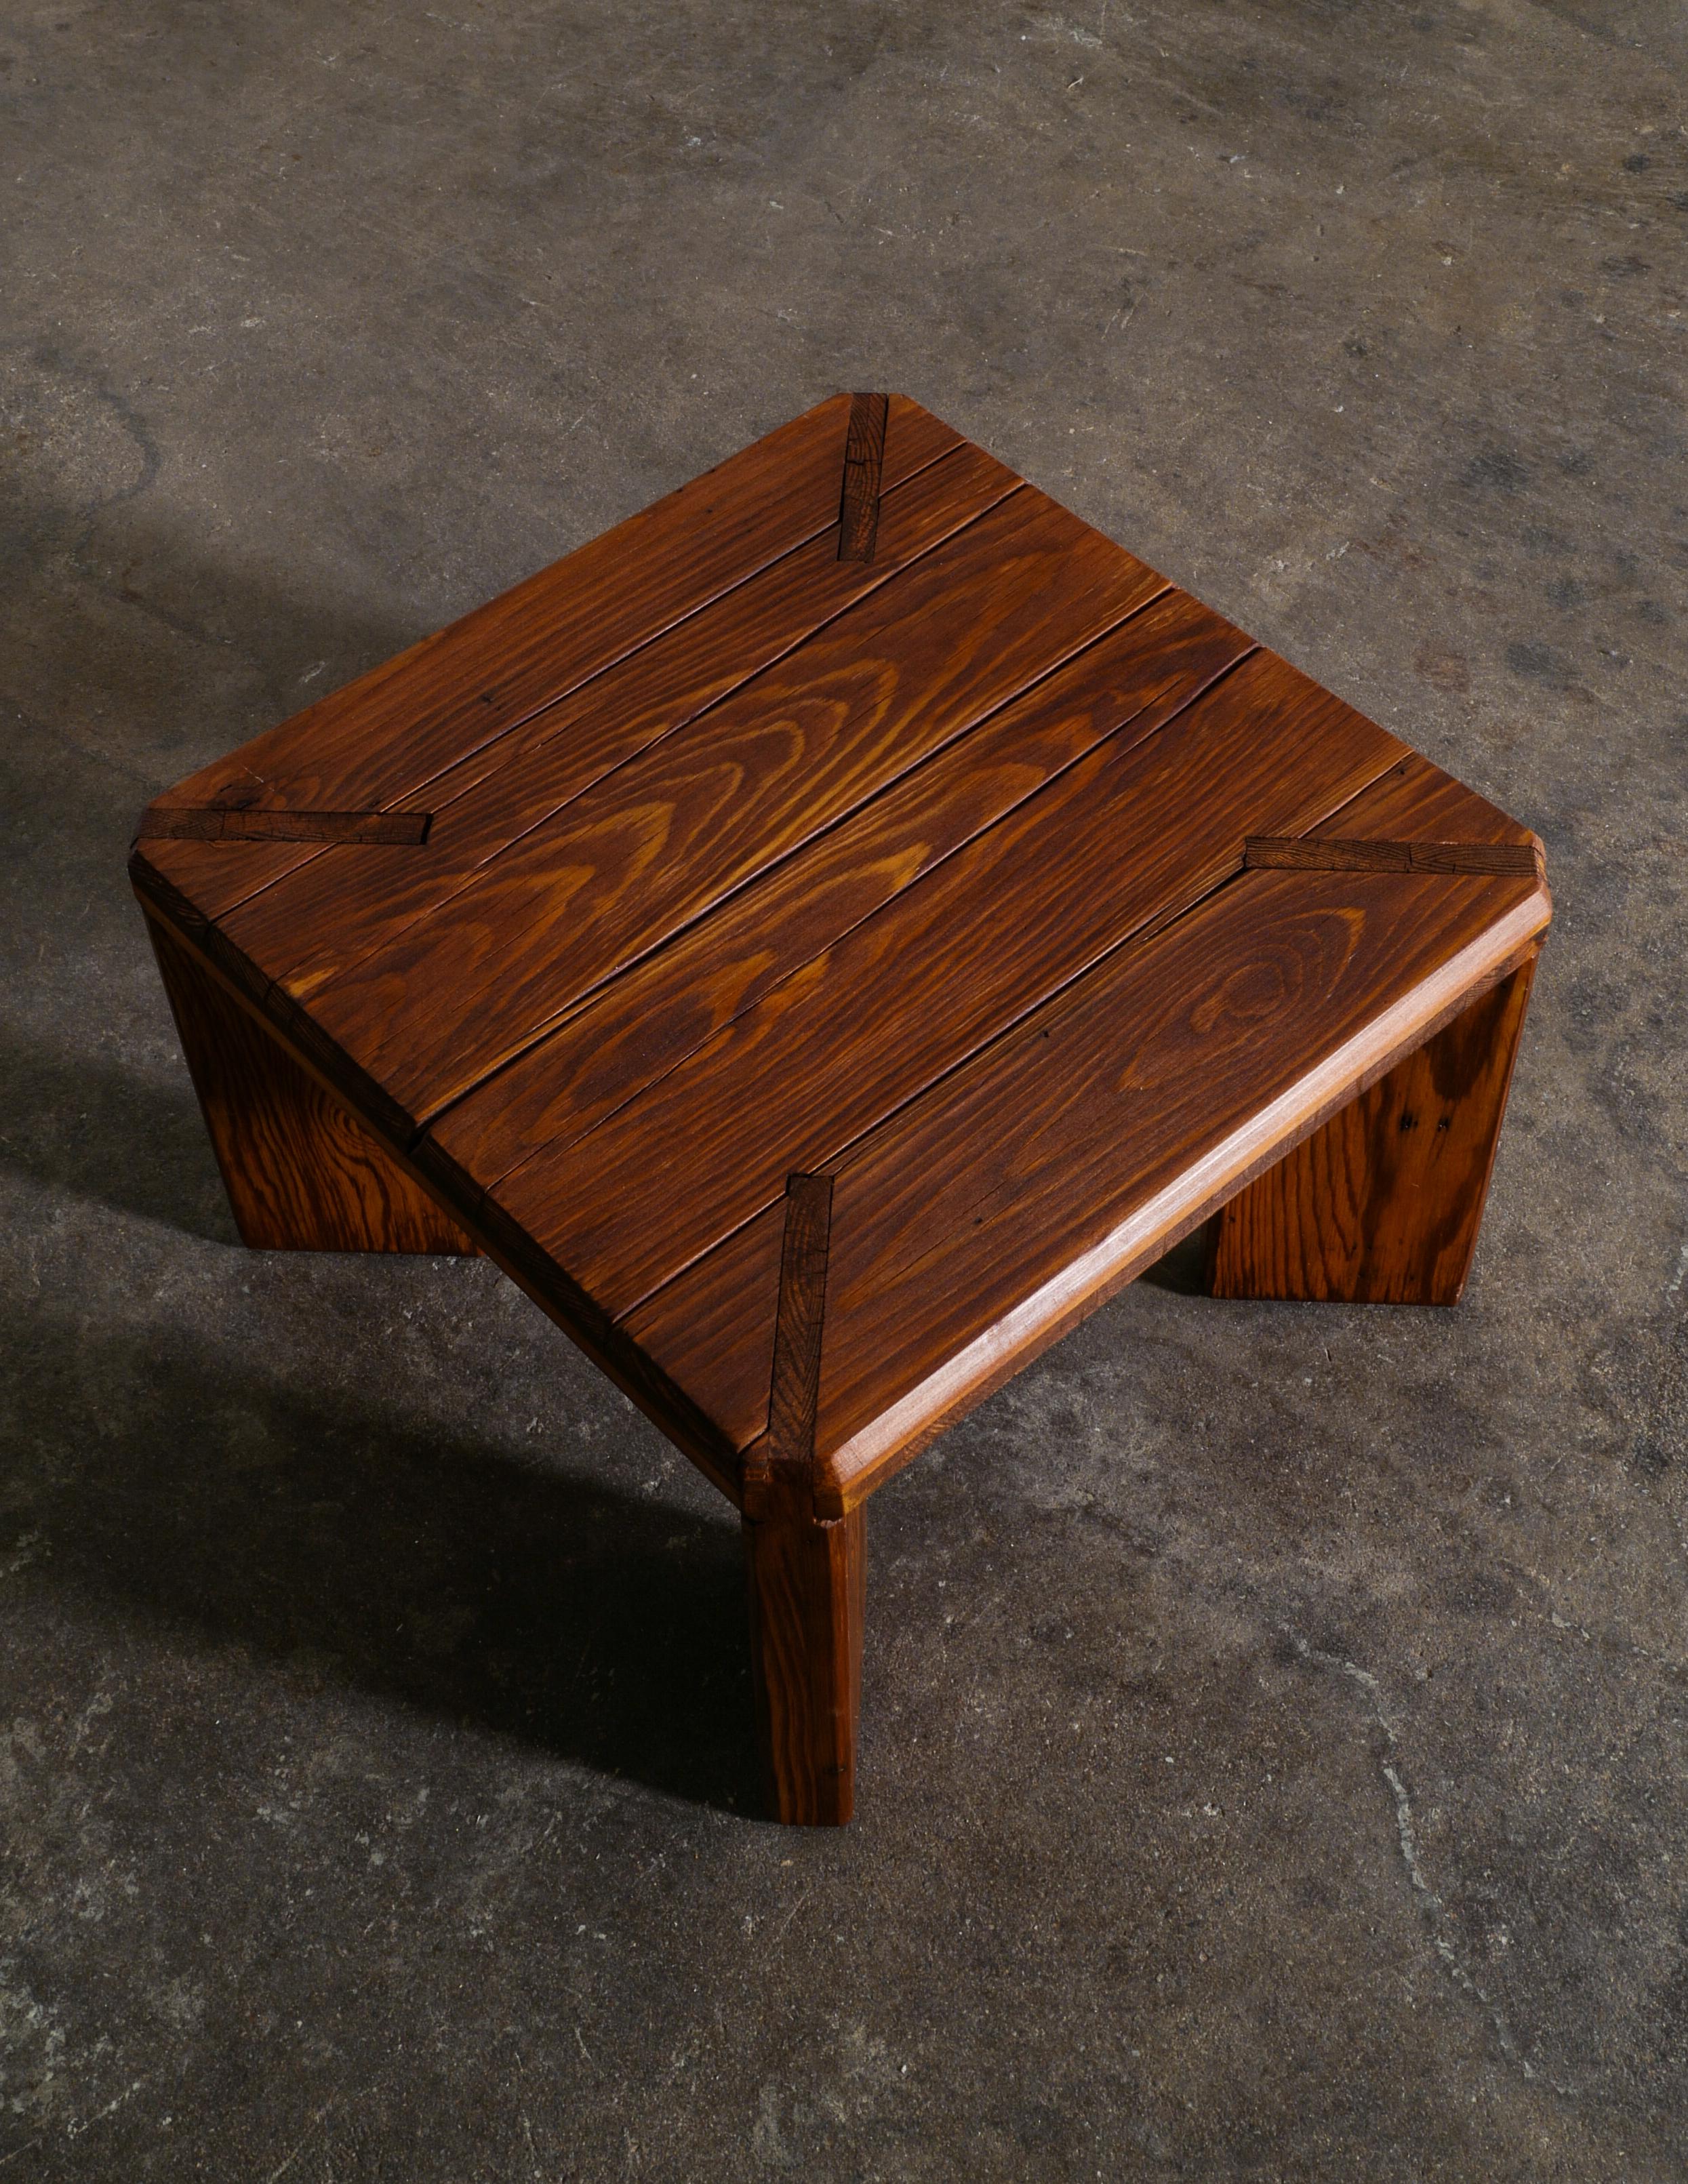 Stained Roland Wilhelmsson Stool Side Table in Pine Produced in Sweden, 1960s